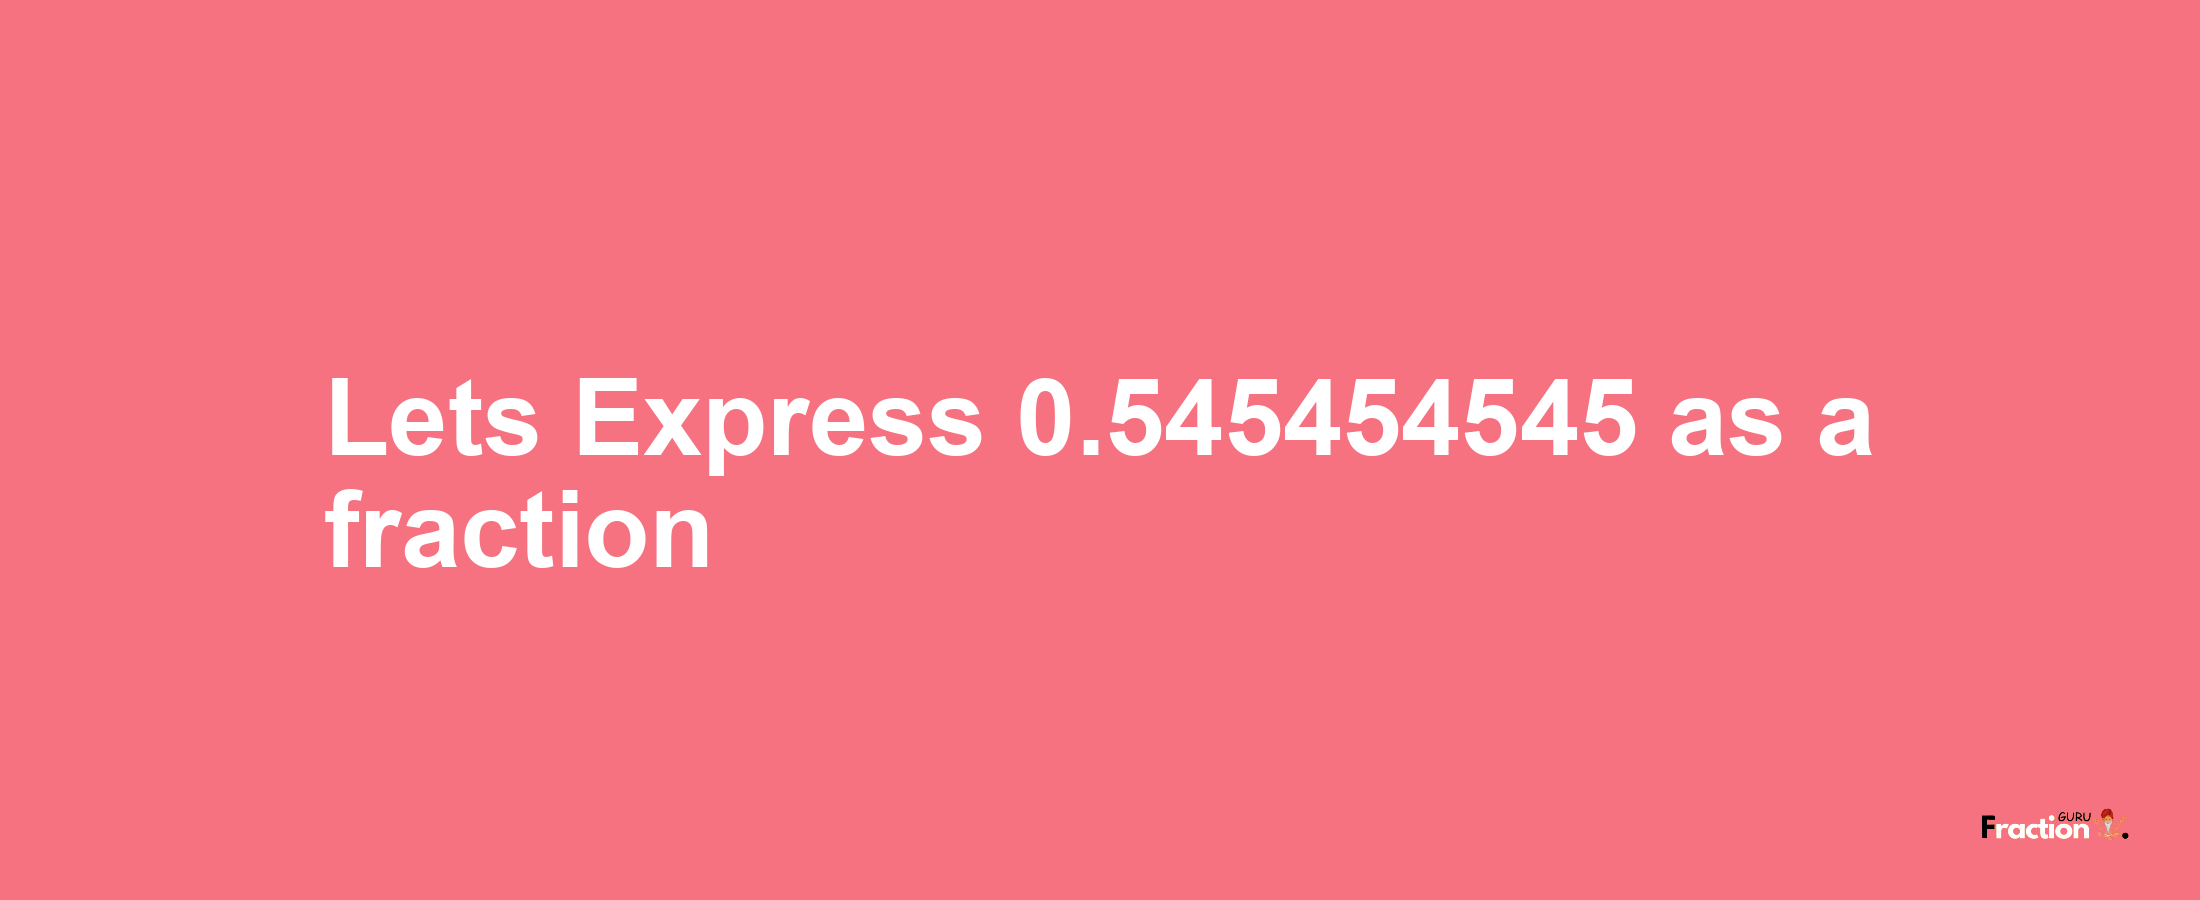 Lets Express 0.545454545 as afraction